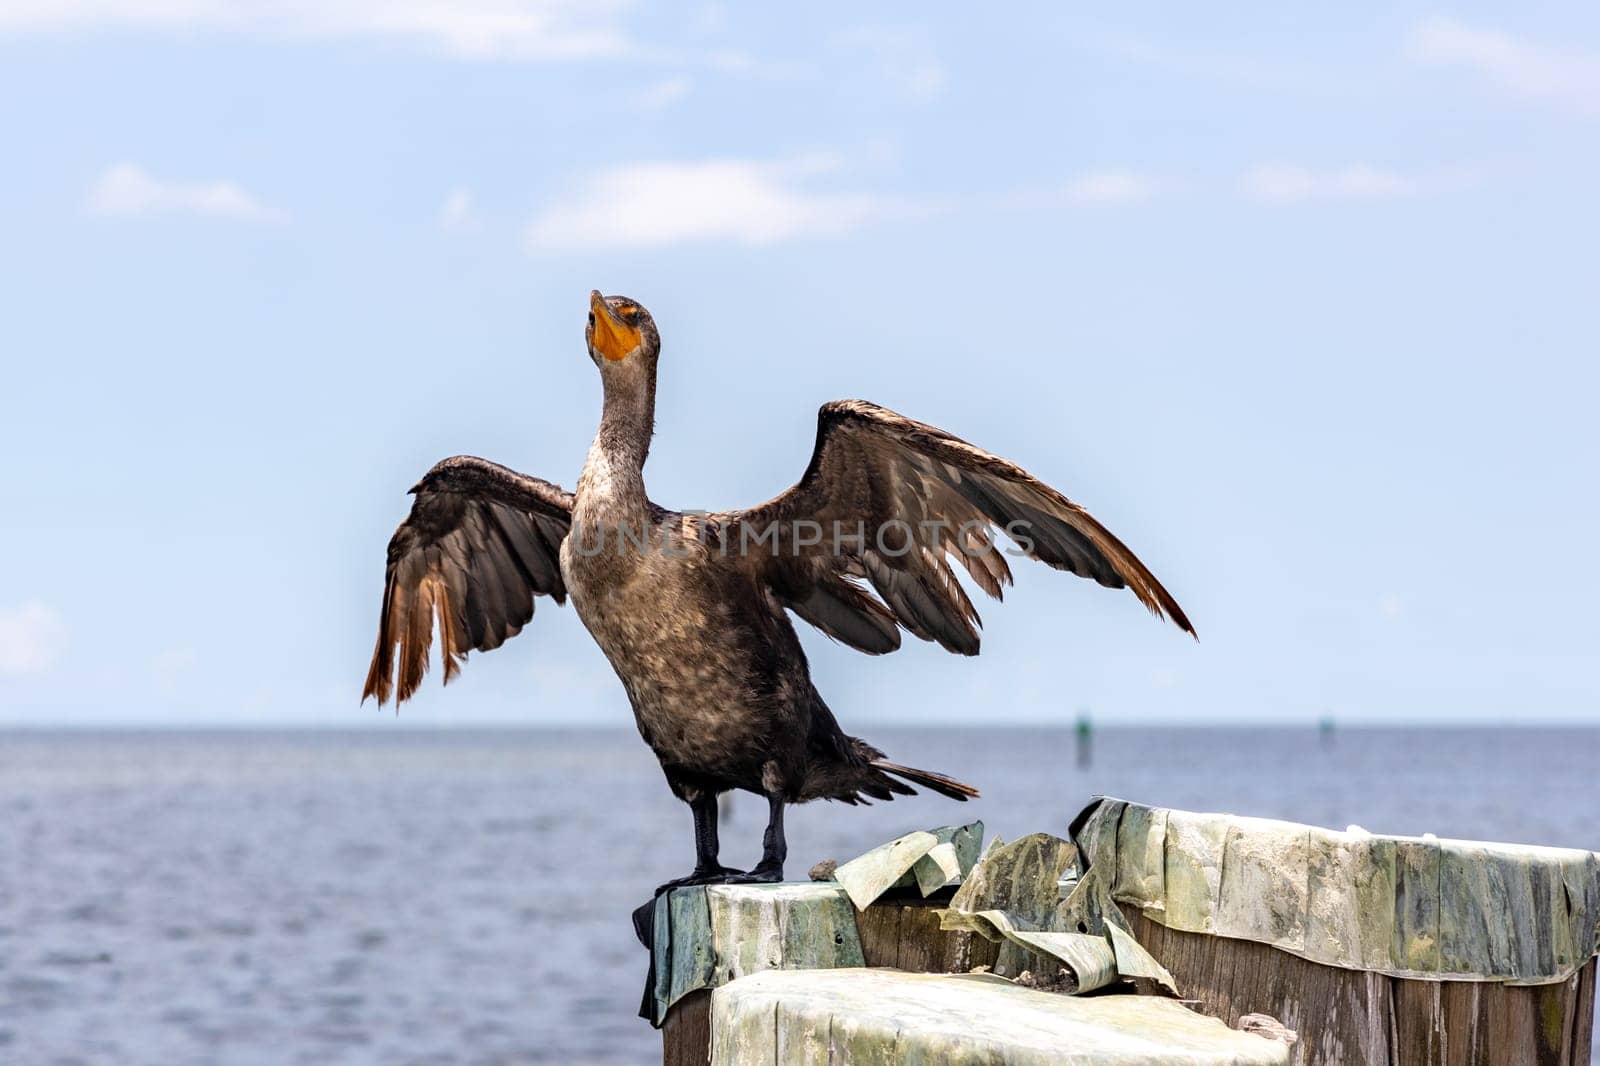 A Double-Crested Cormorant drying out it's wings on rock in the ocean, clear blue sky on background.